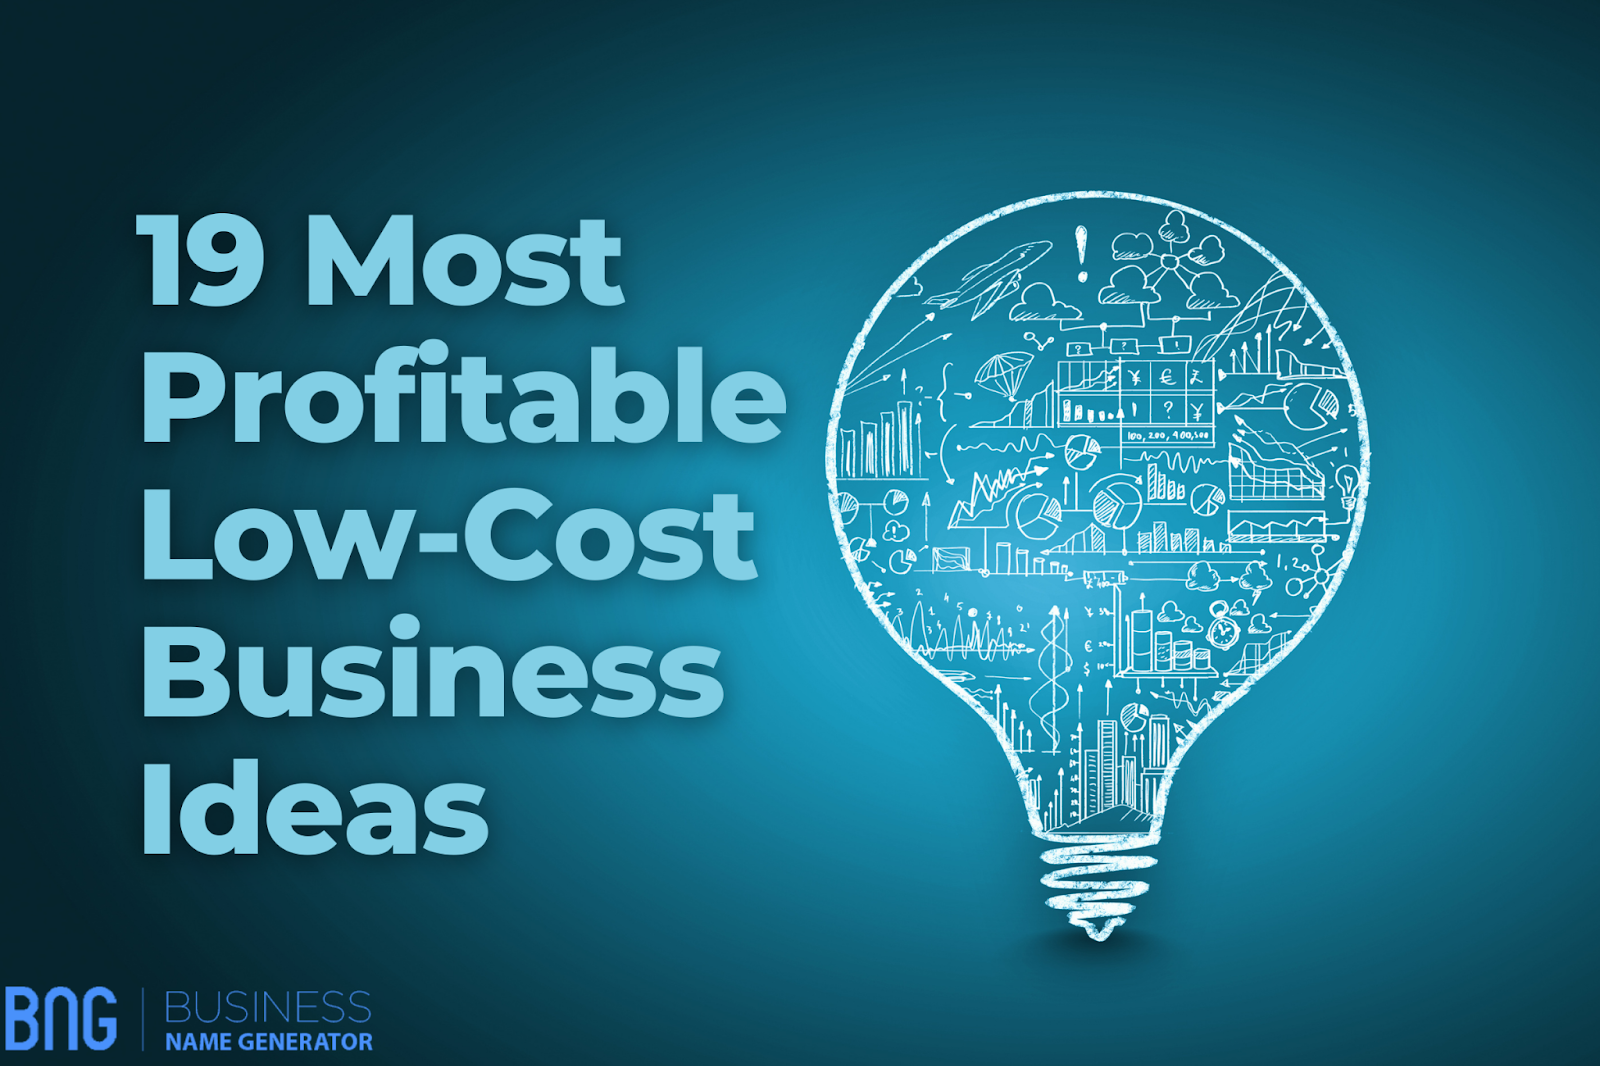 19 most profitable low-cost business ideas